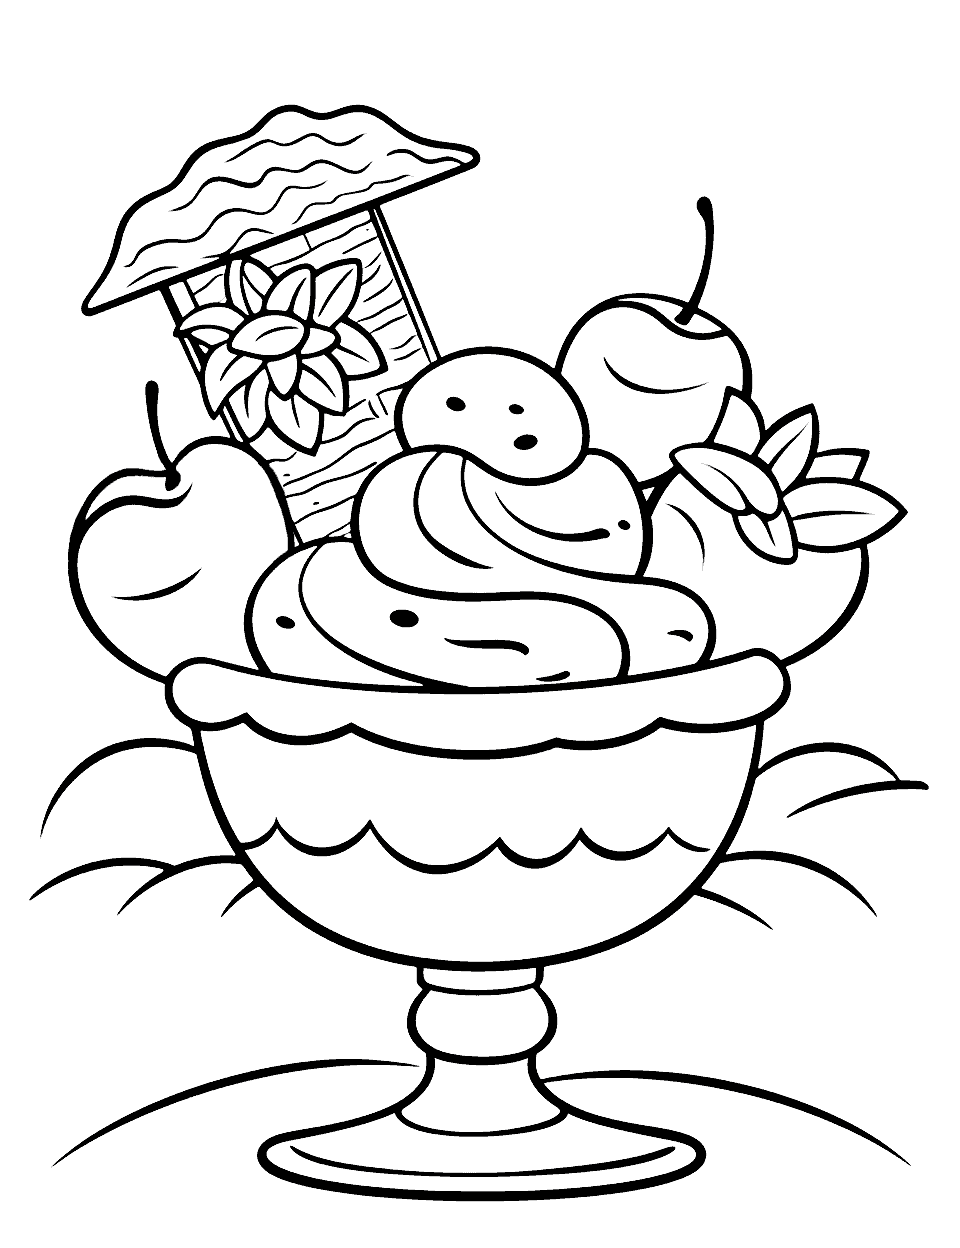 Rainbow Ice Cream Sundae Summer Coloring Page - A towering ice cream sundae with scoops of different flavors, topped with whipped cream, sprinkles, and a cherry.